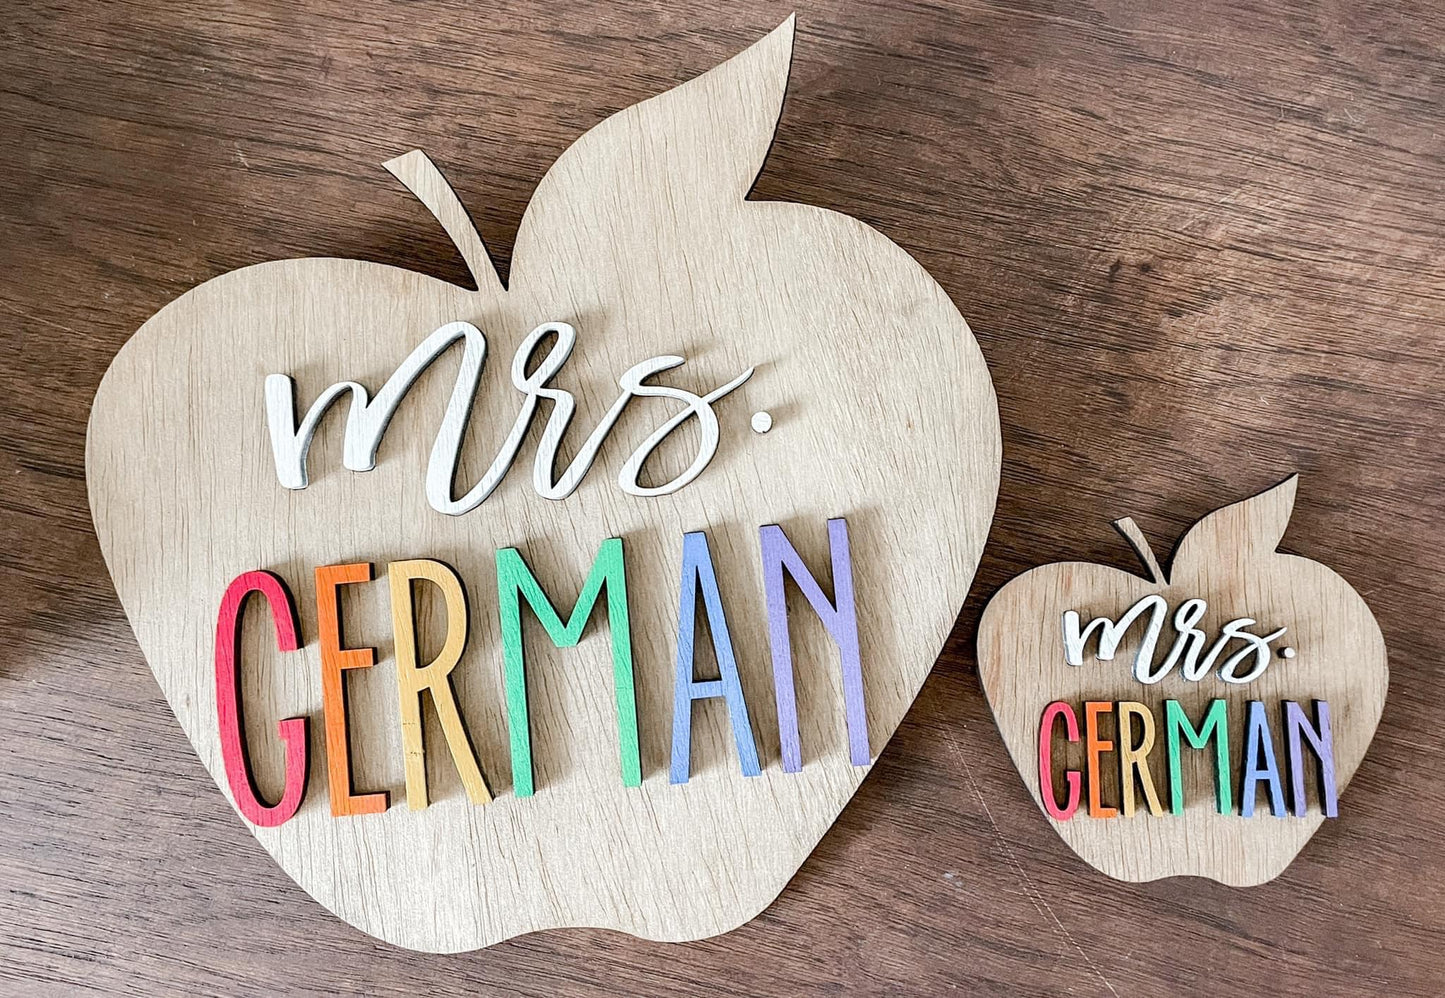 Personalized 5" Apple Magnet (PREORDER - SHIPS IN 5 WEEKS)